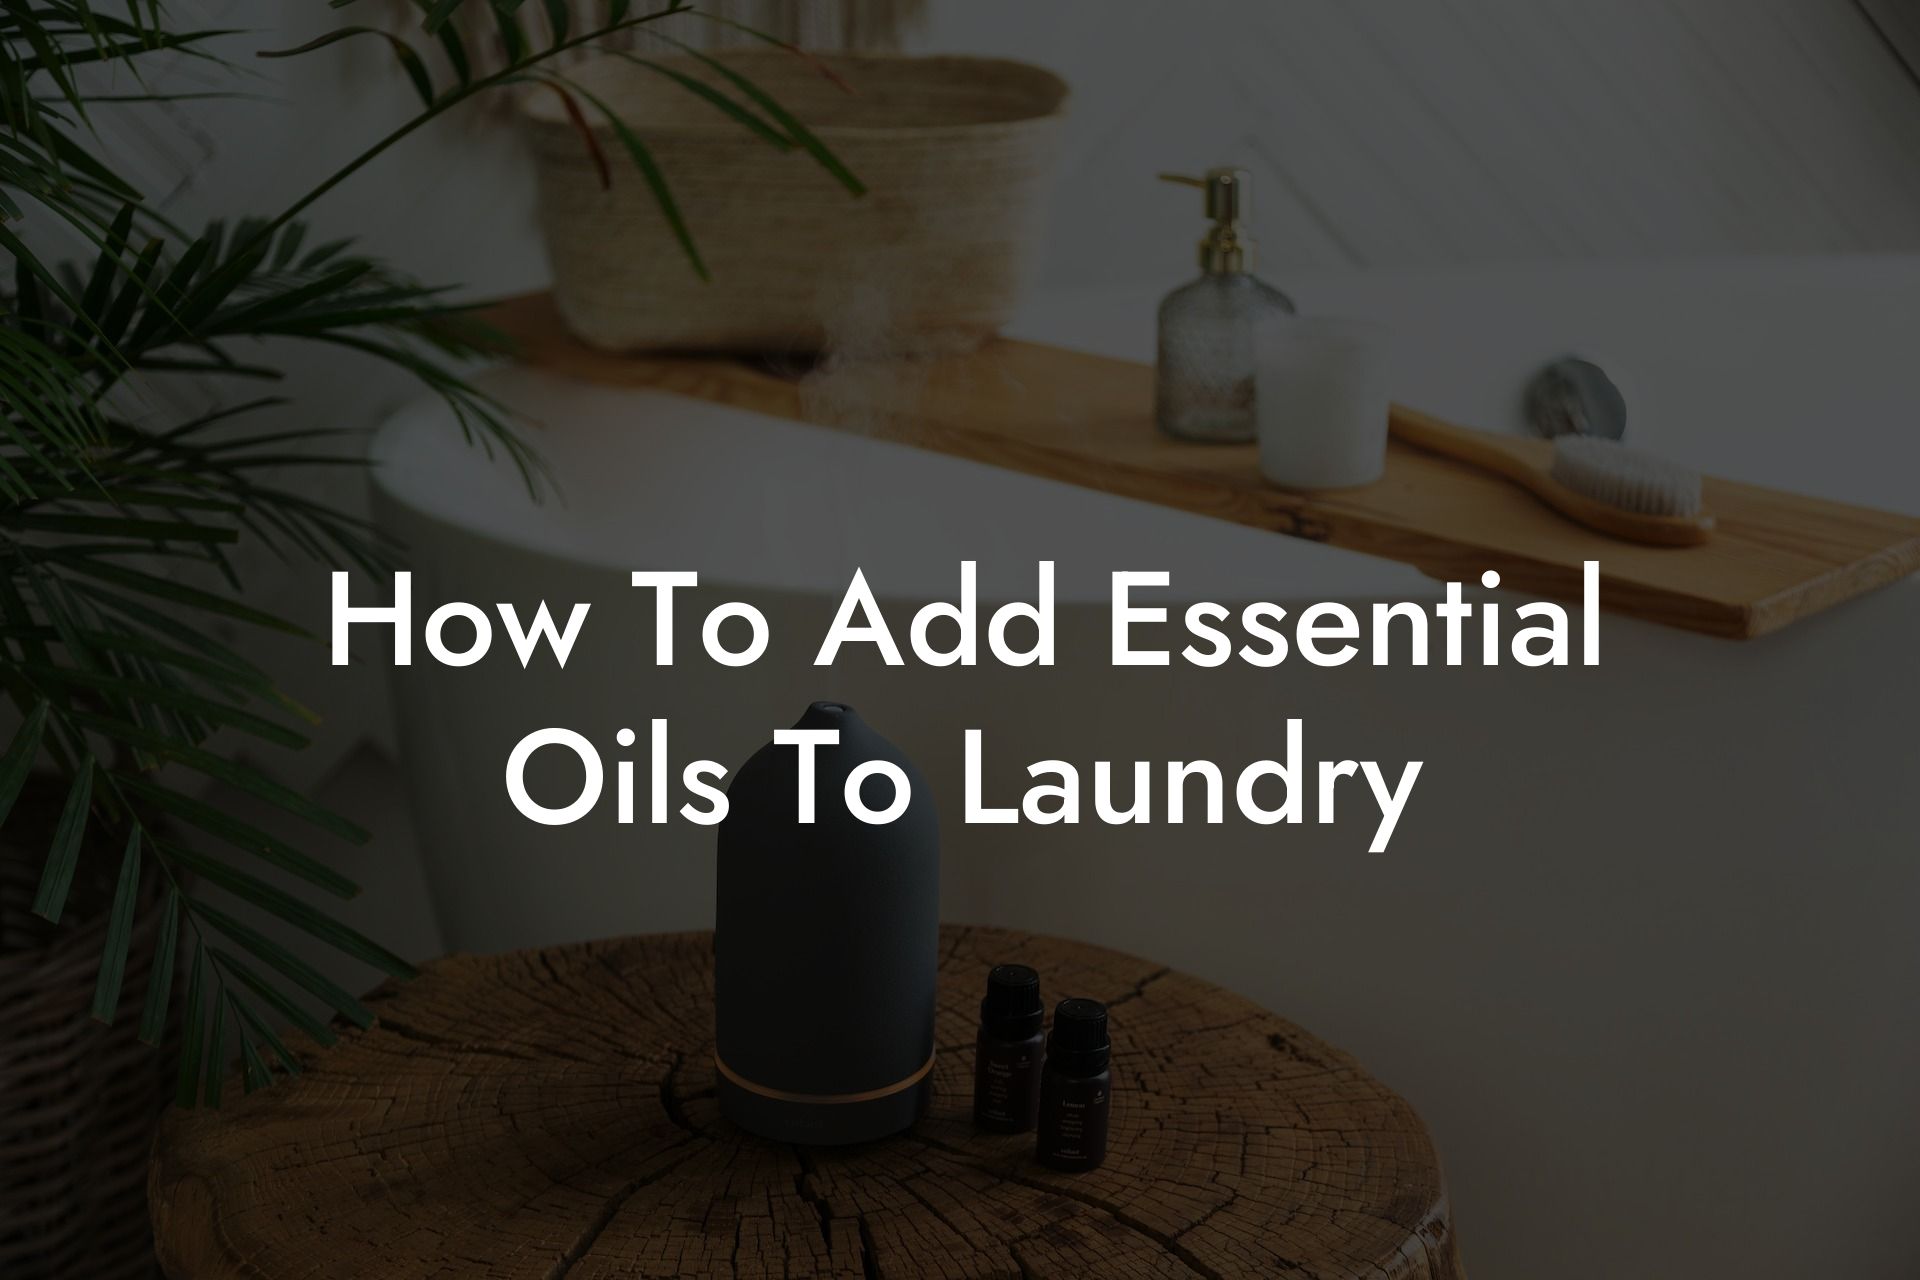 How To Add Essential Oils To Laundry